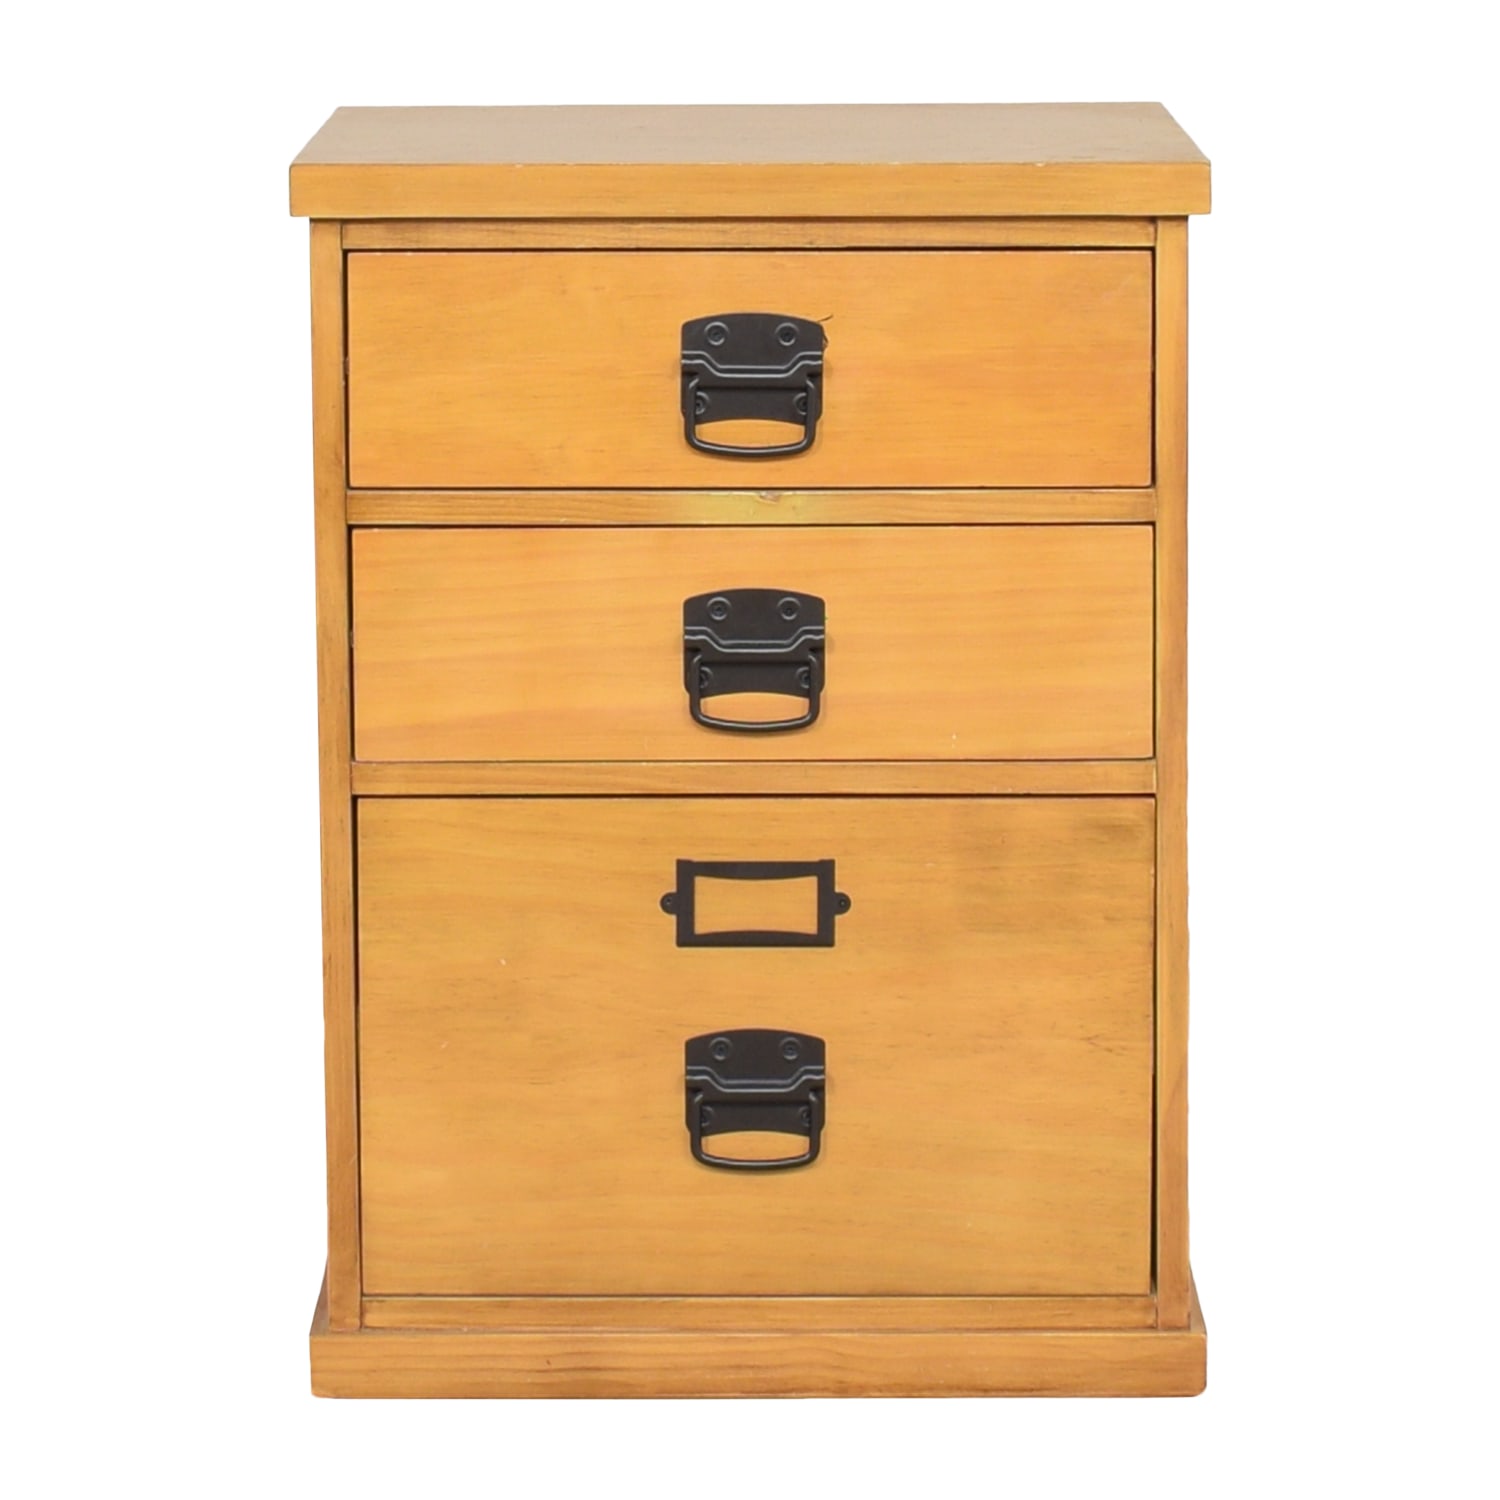 Pottery Barn Bedford Three Drawer File Cabinet / Storage